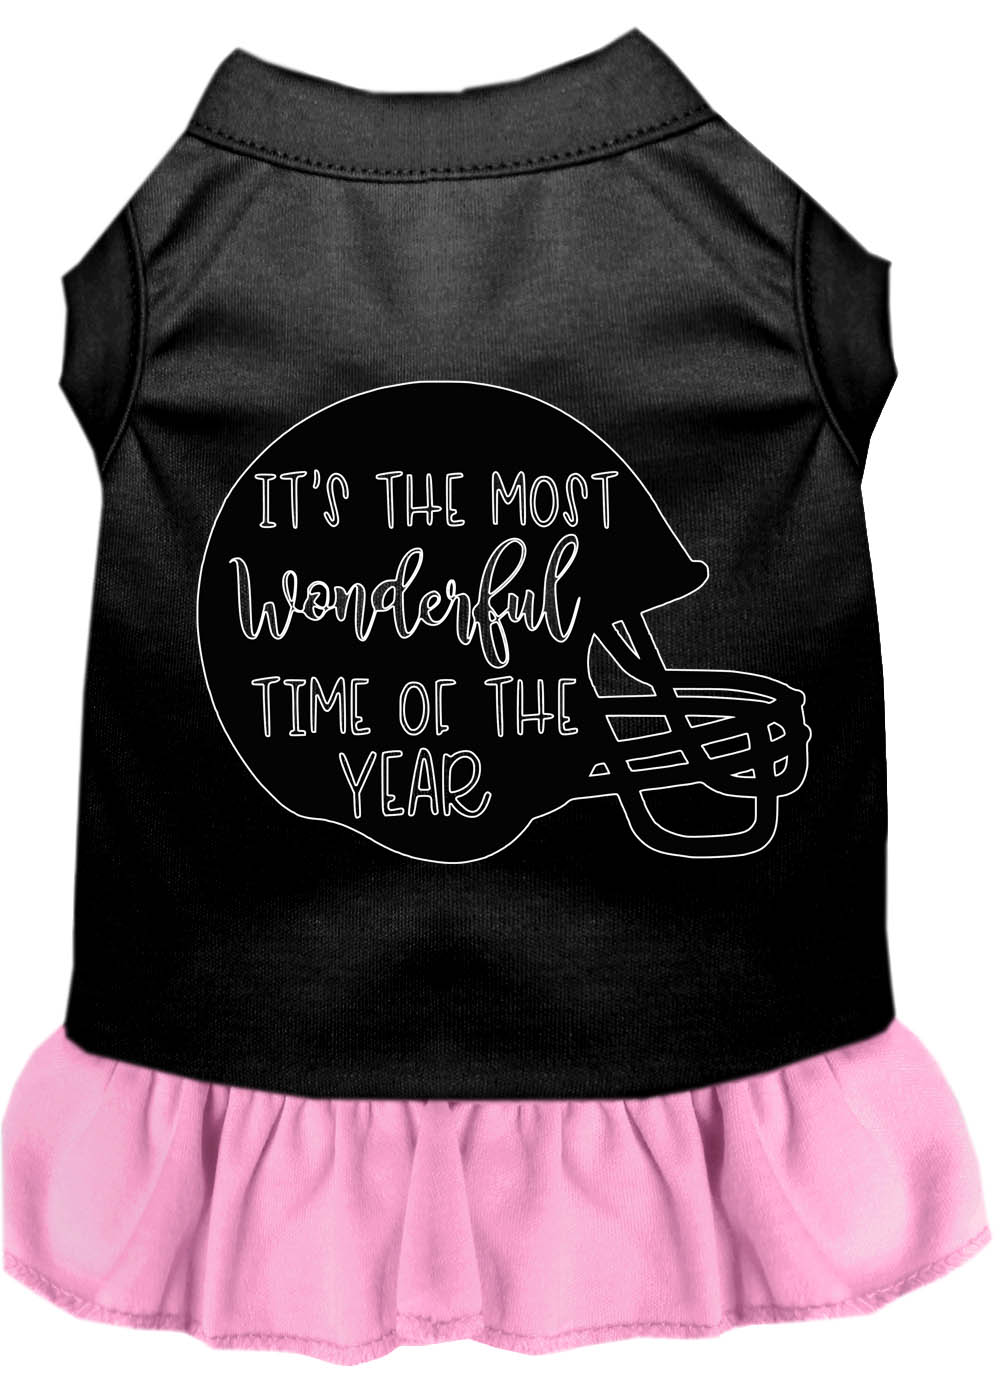 Most Wonderful Time of the Year (Football) Screen Print Dog Dress Black with Light Pink Lg